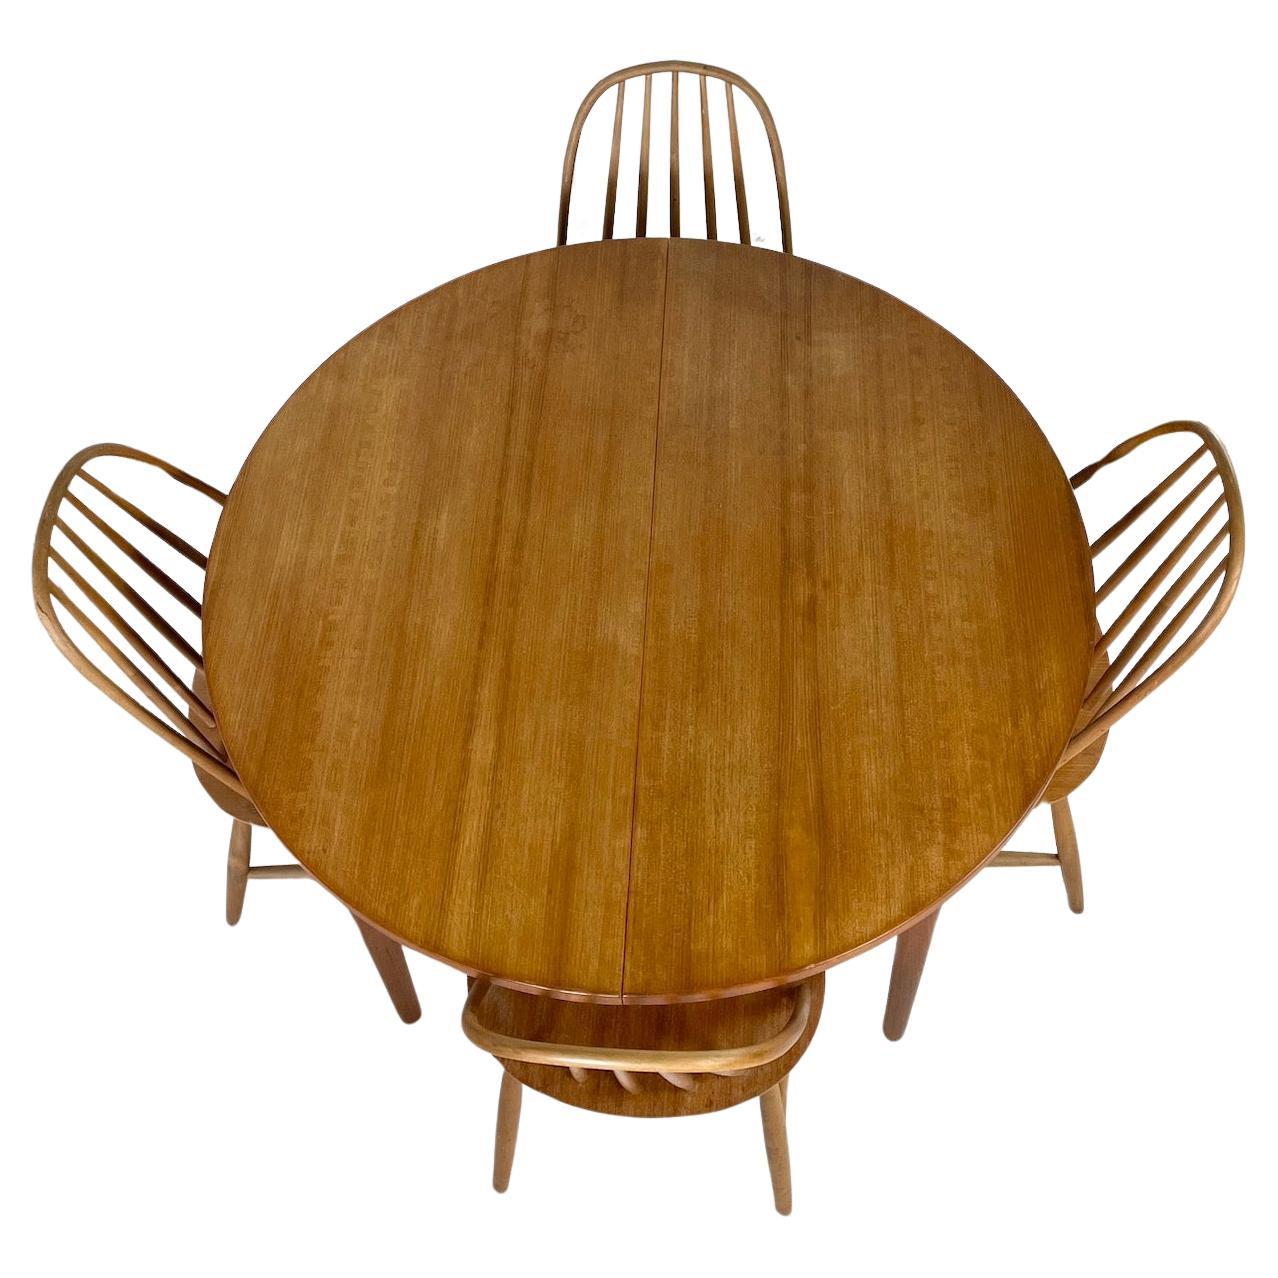 Swedish teak circular dining table extending to an oval with 2 integrated folding leaves
Made in Sweden
Label to underside of table
TROEDS Malta Nils Jonsson
Circa 1950s
Table Circular: Height 73cm Diameter 110cm
Table Oval: Height 73cm Length 140cm